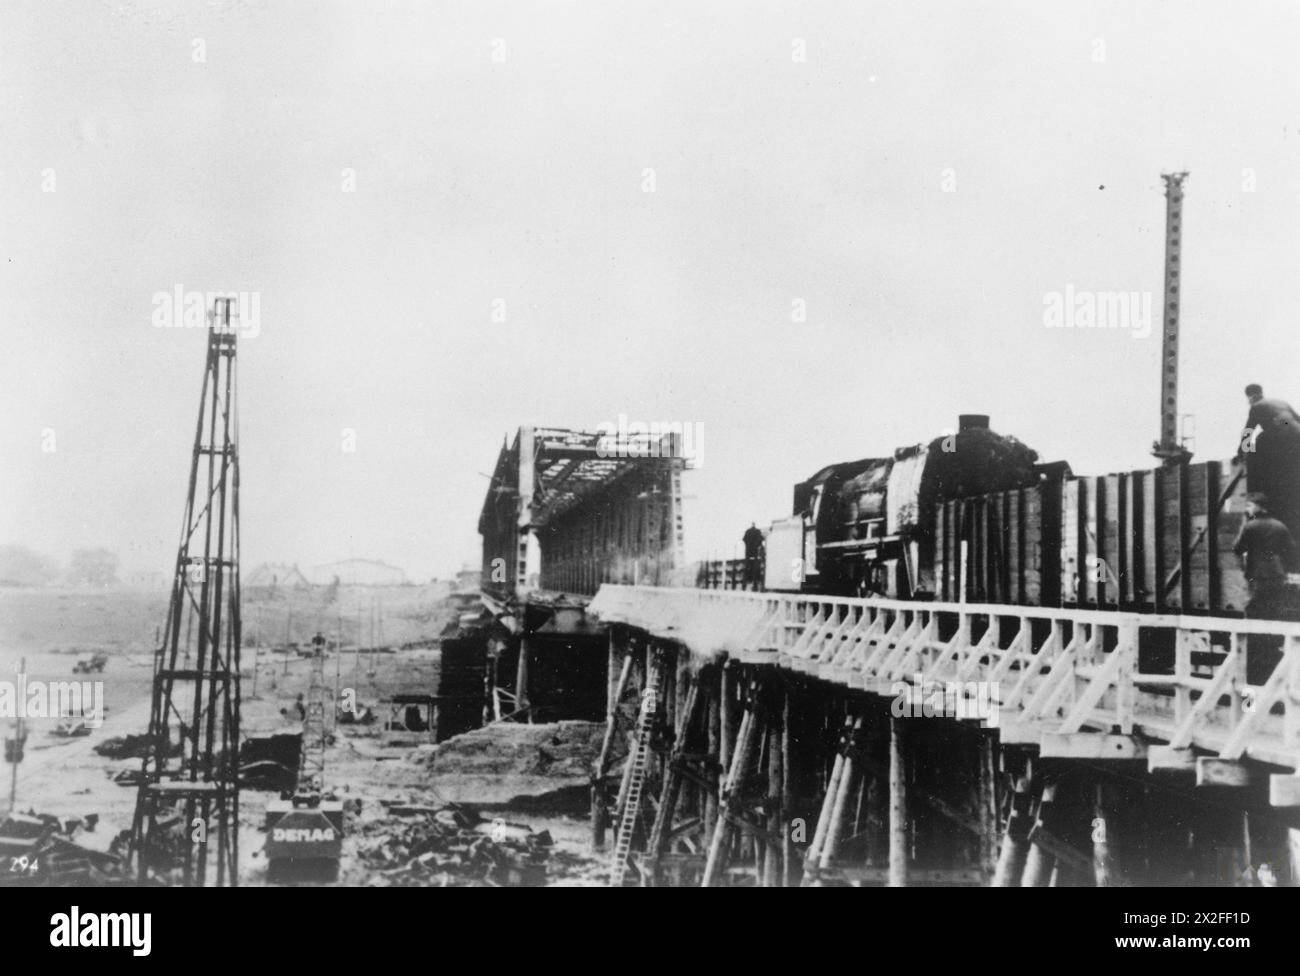 THE GERMAN-SOVIET INVASION OF POLAND, 1939 - German Army Engineers rebuilding the big railway bridge near the town of Tczew (Dirschau), which was blown up by the retreating Polish units German Army Stock Photo